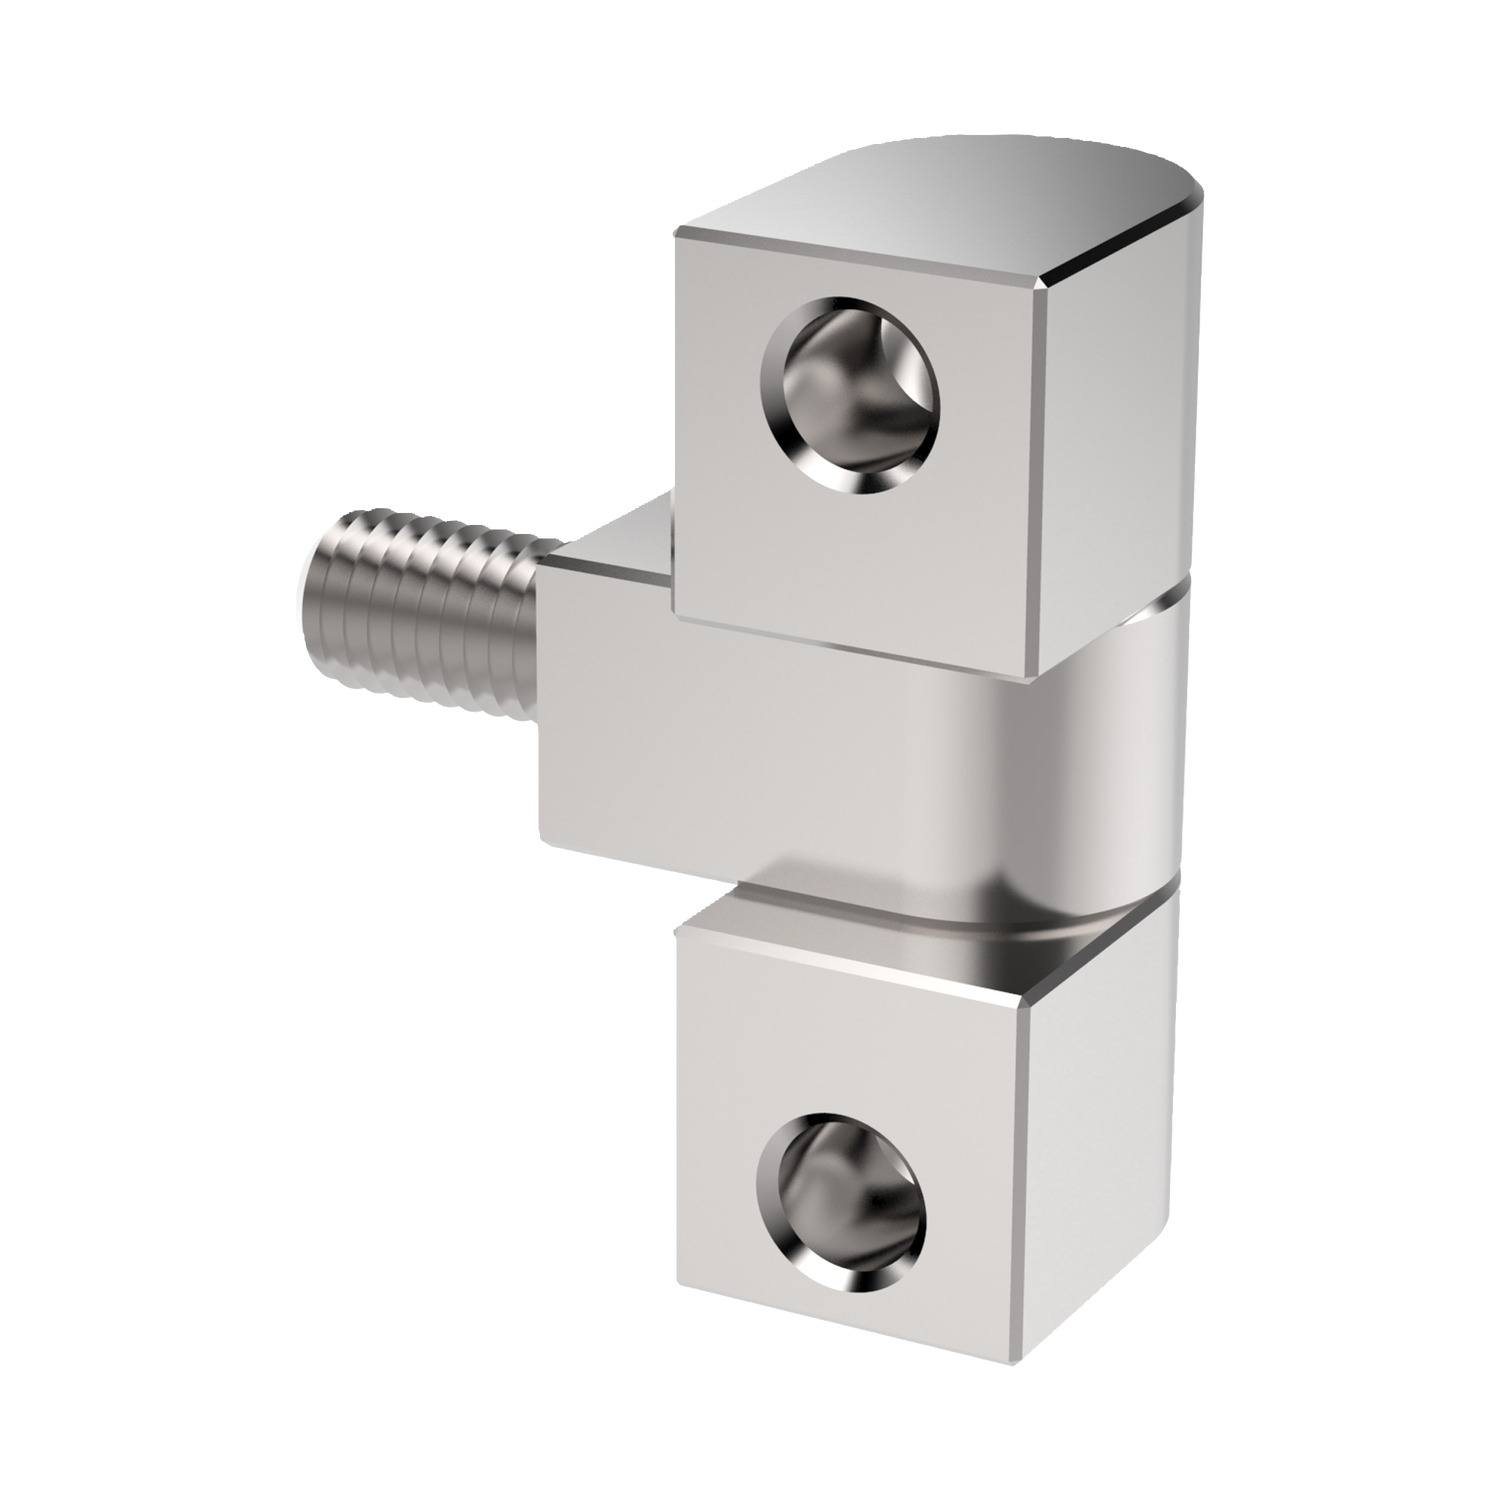 S1170.AW0010 Surface Mount Hinge integrated stud mount